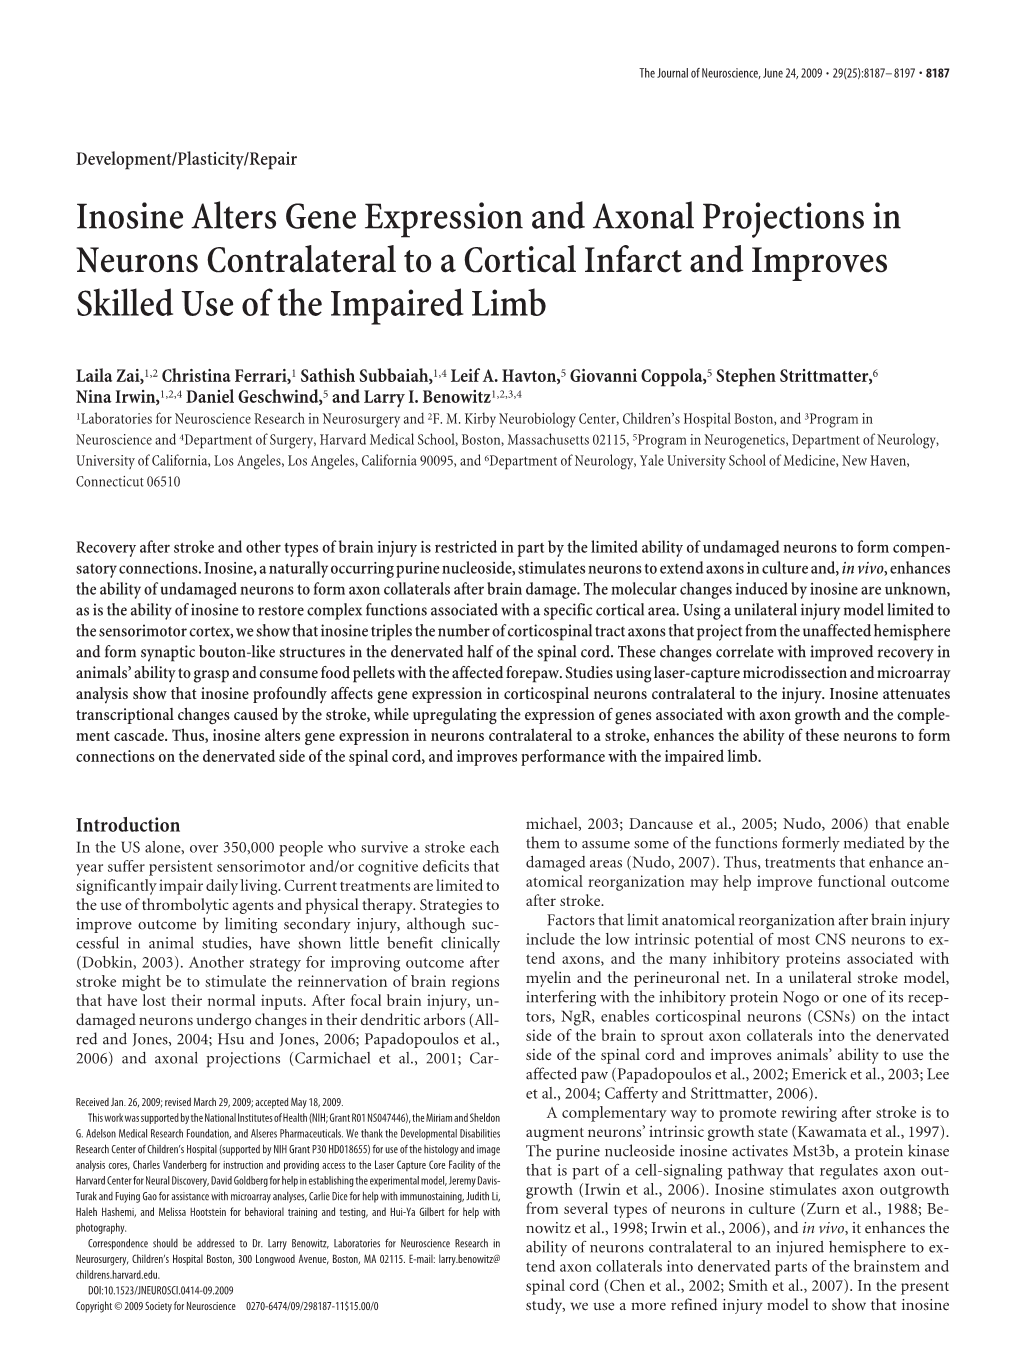 Inosine Alters Gene Expression and Axonal Projections in Neurons Contralateral to a Cortical Infarct and Improves Skilled Use of the Impaired Limb